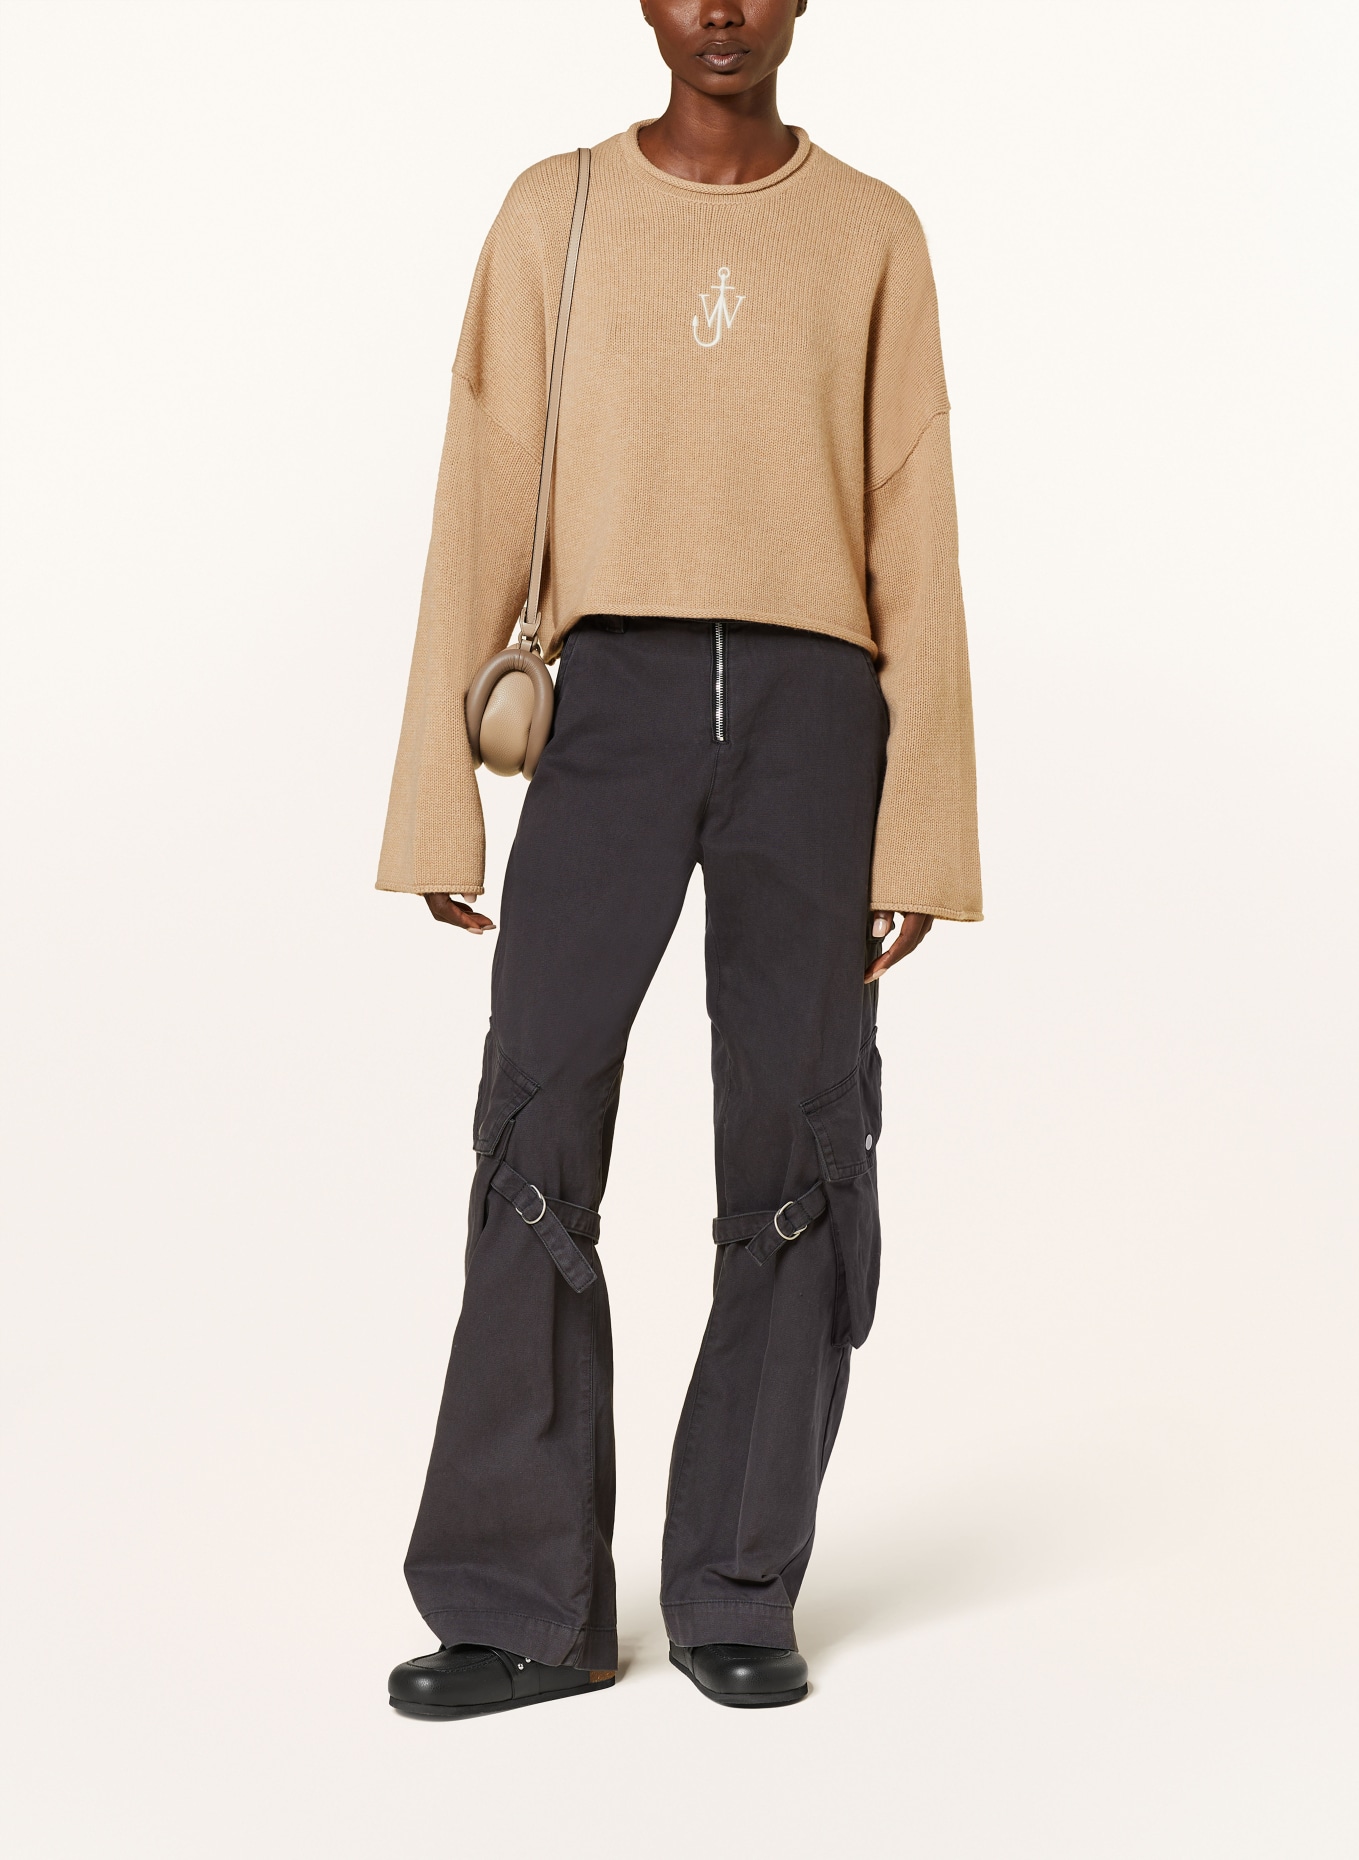 JW ANDERSON Cropped sweater, Color: BEIGE (Image 2)